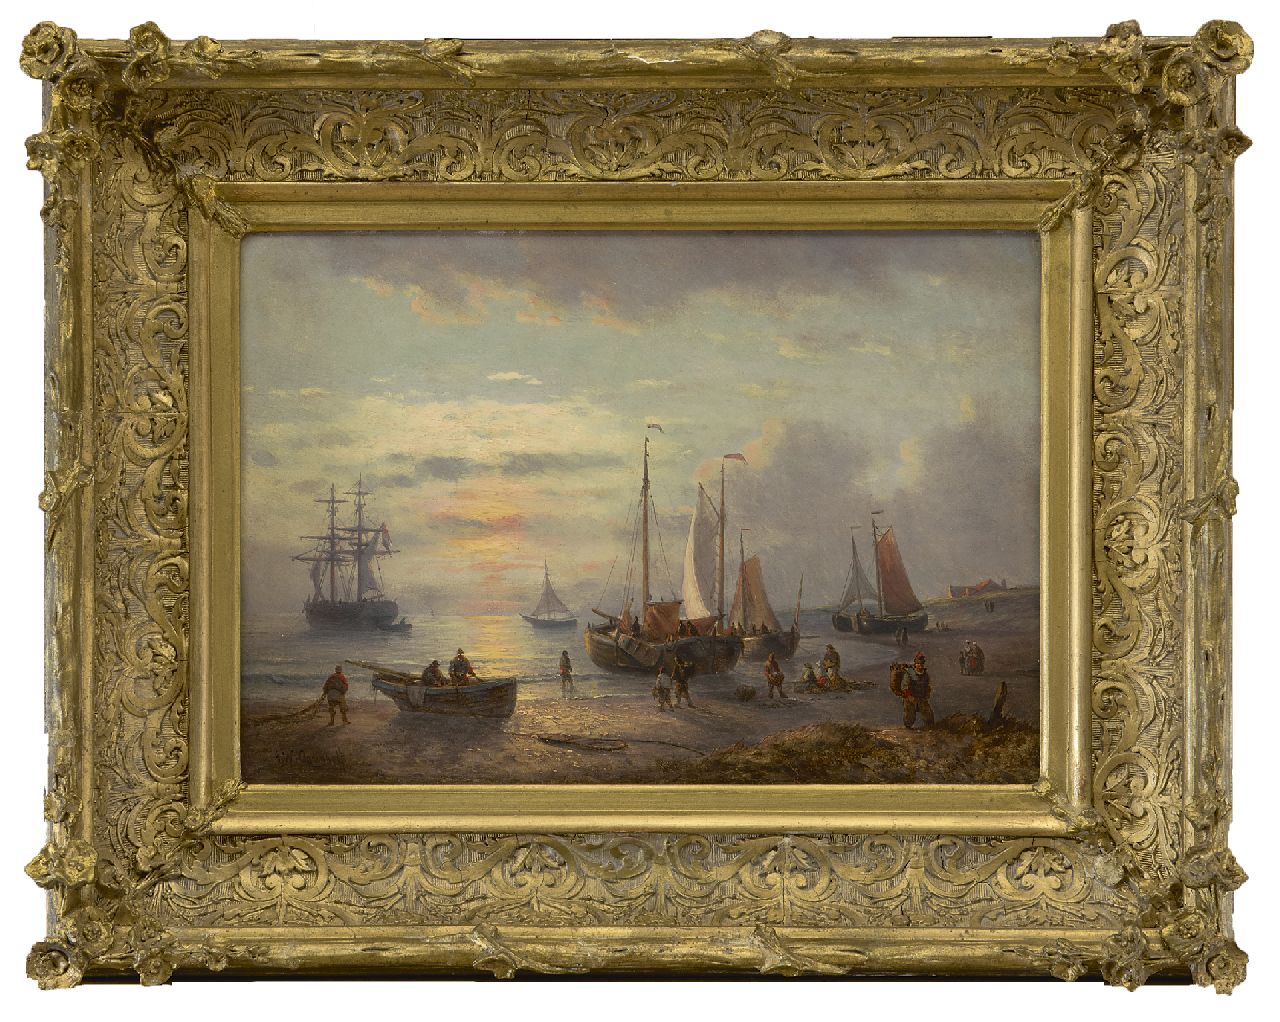 Opdenhoff G.W.  | Witzel 'George Willem' Opdenhoff, Fishermen and barges on the beach, at sunset, oil on panel 21.6 x 31.1 cm, signed l.l.